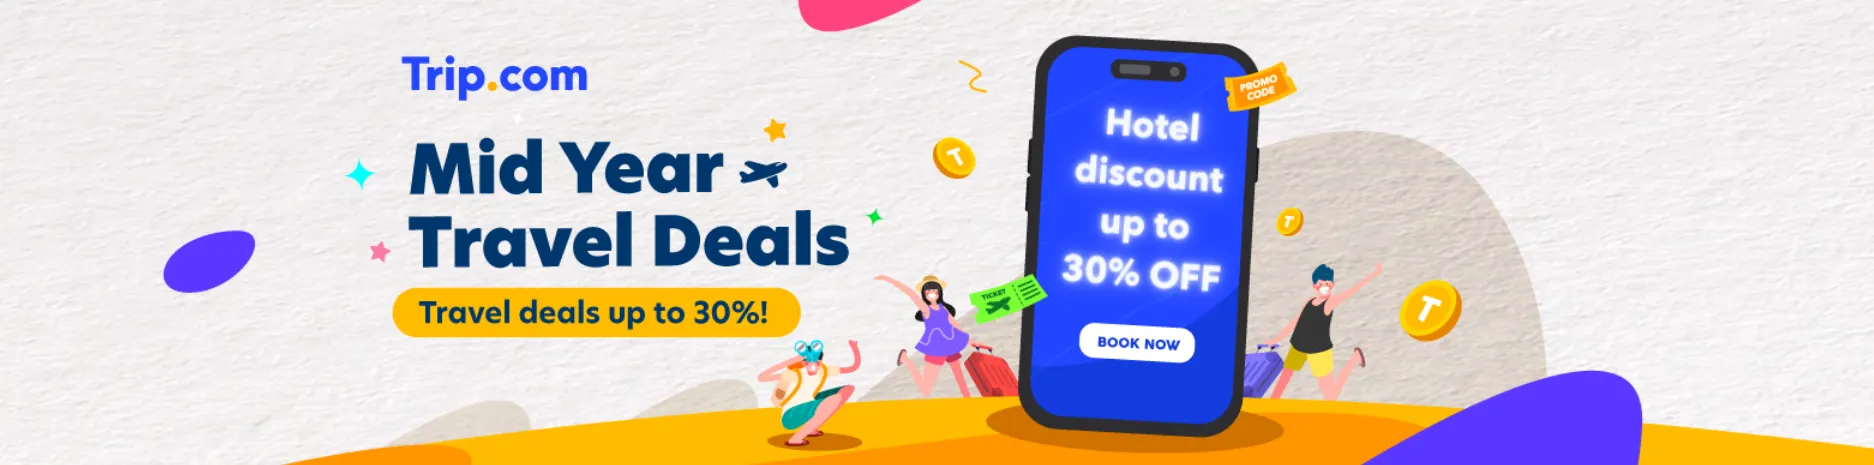 Trip.com Promo Code Malaysia: Mid Year Travel Deals: Hotel Discount up to 30% Off!